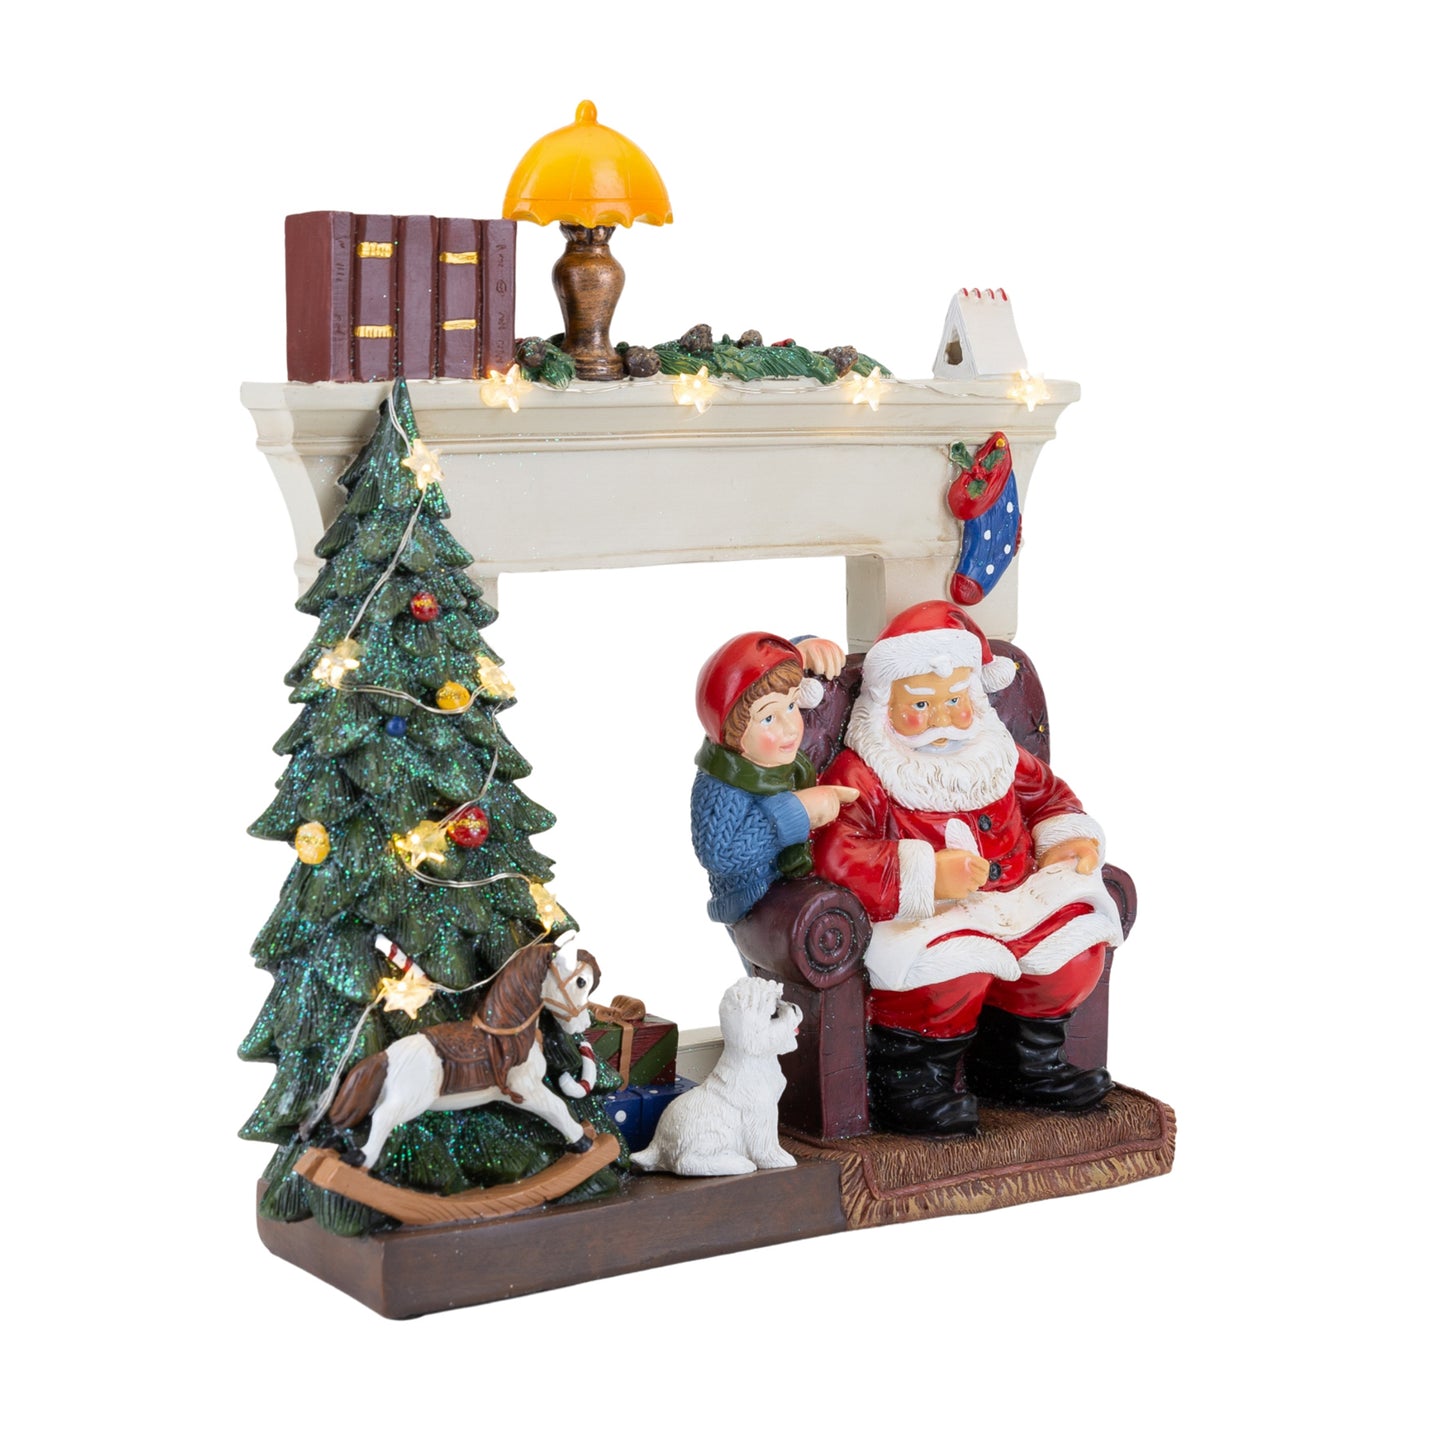 Santa Sat By The Fireplace Handpainted LED Figurine - 30 x 27 x 8 cm